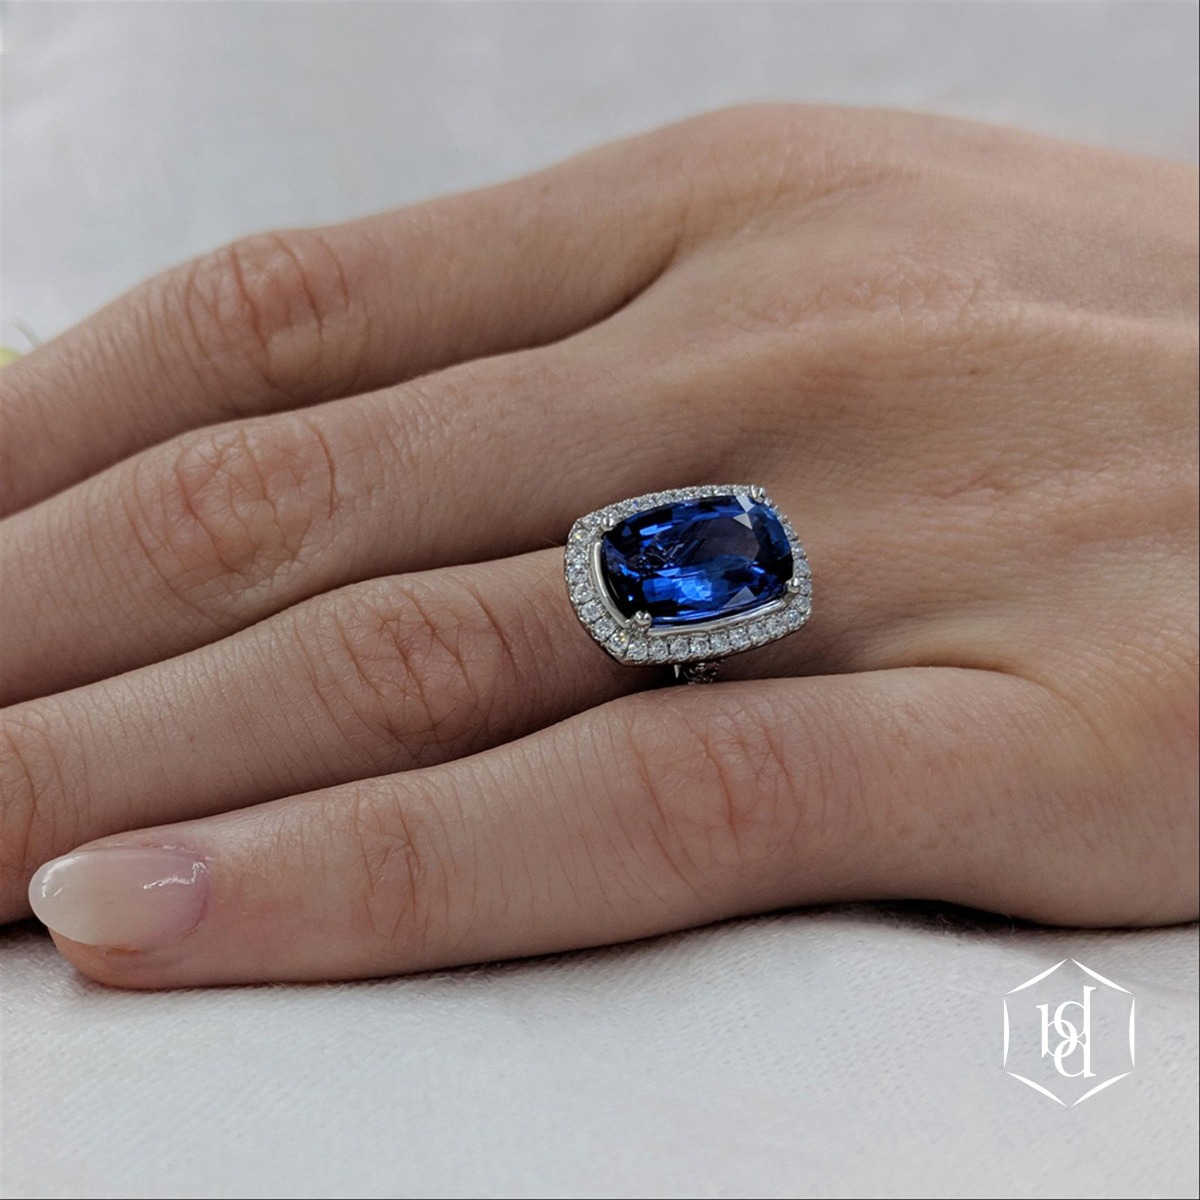 Diamond by Appointment Sapphire Ring on Model Hand 